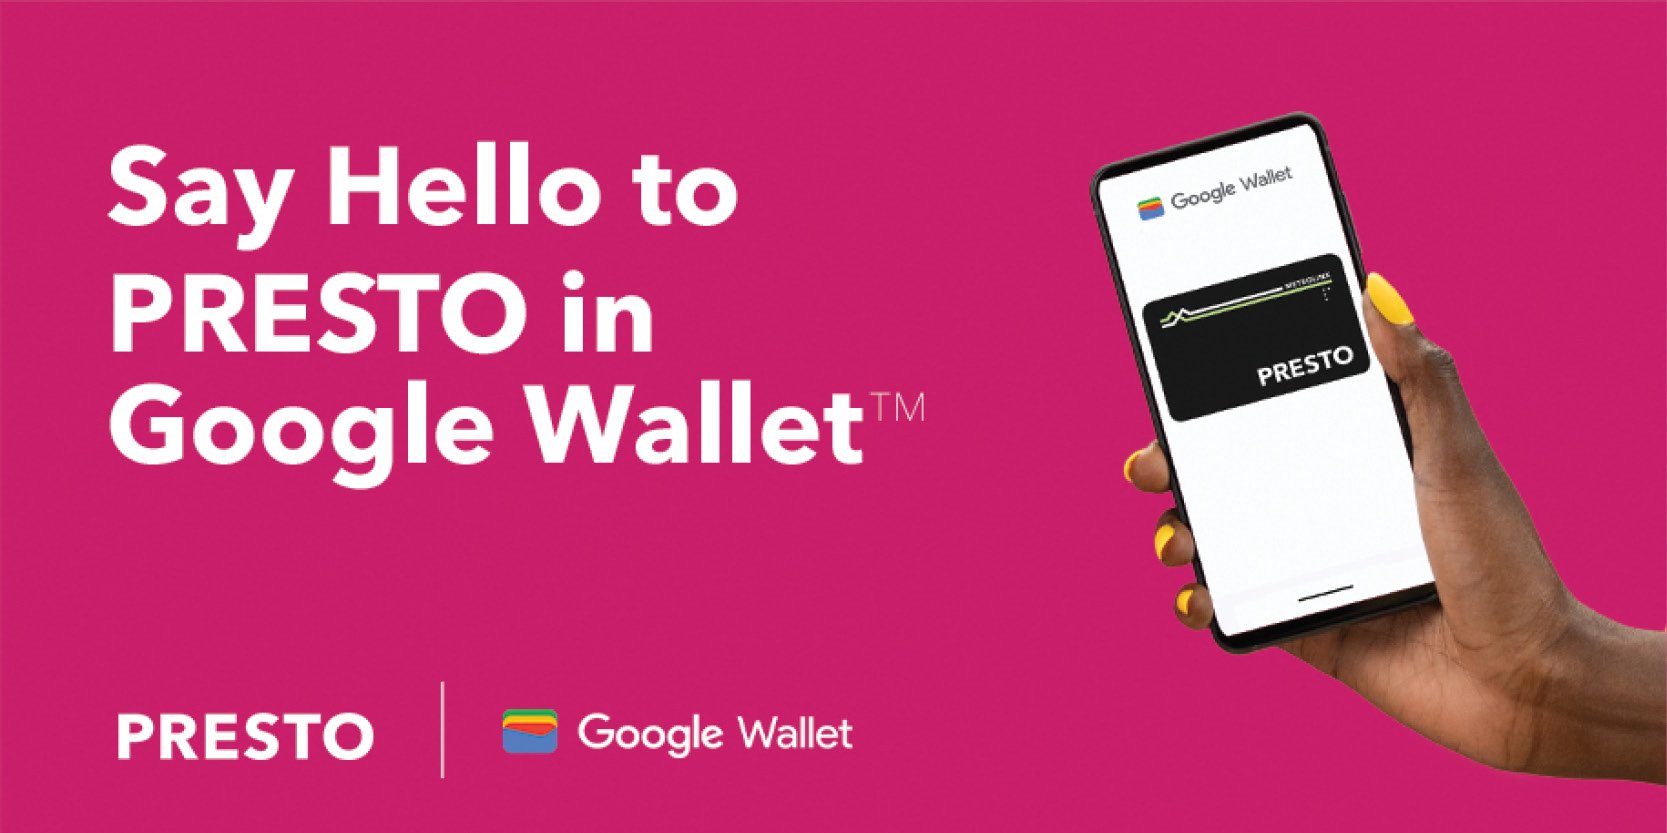 image of hand holding a phone showing the Google Wallet app, with text: Say Hello to PRESTO in Google Wallet